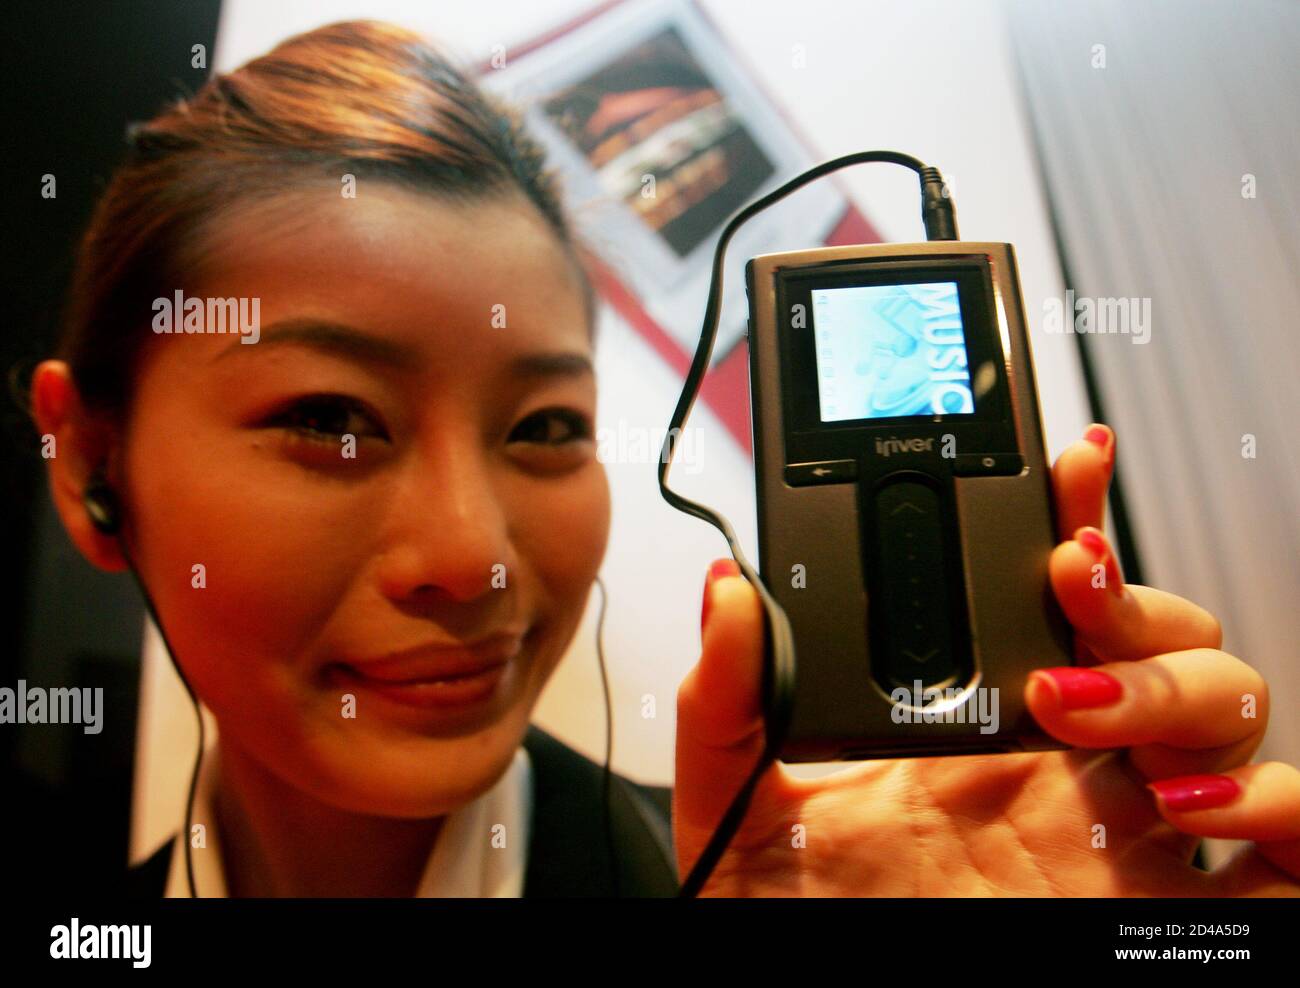 A promoter displays South Korea's portable multi-media player brand  ReignCom Co.Ltd's new mini Hard Disk Drive (HDD) type MP3 player 'iriver  H10' during its launch in Seoul December 16, 2004. The new